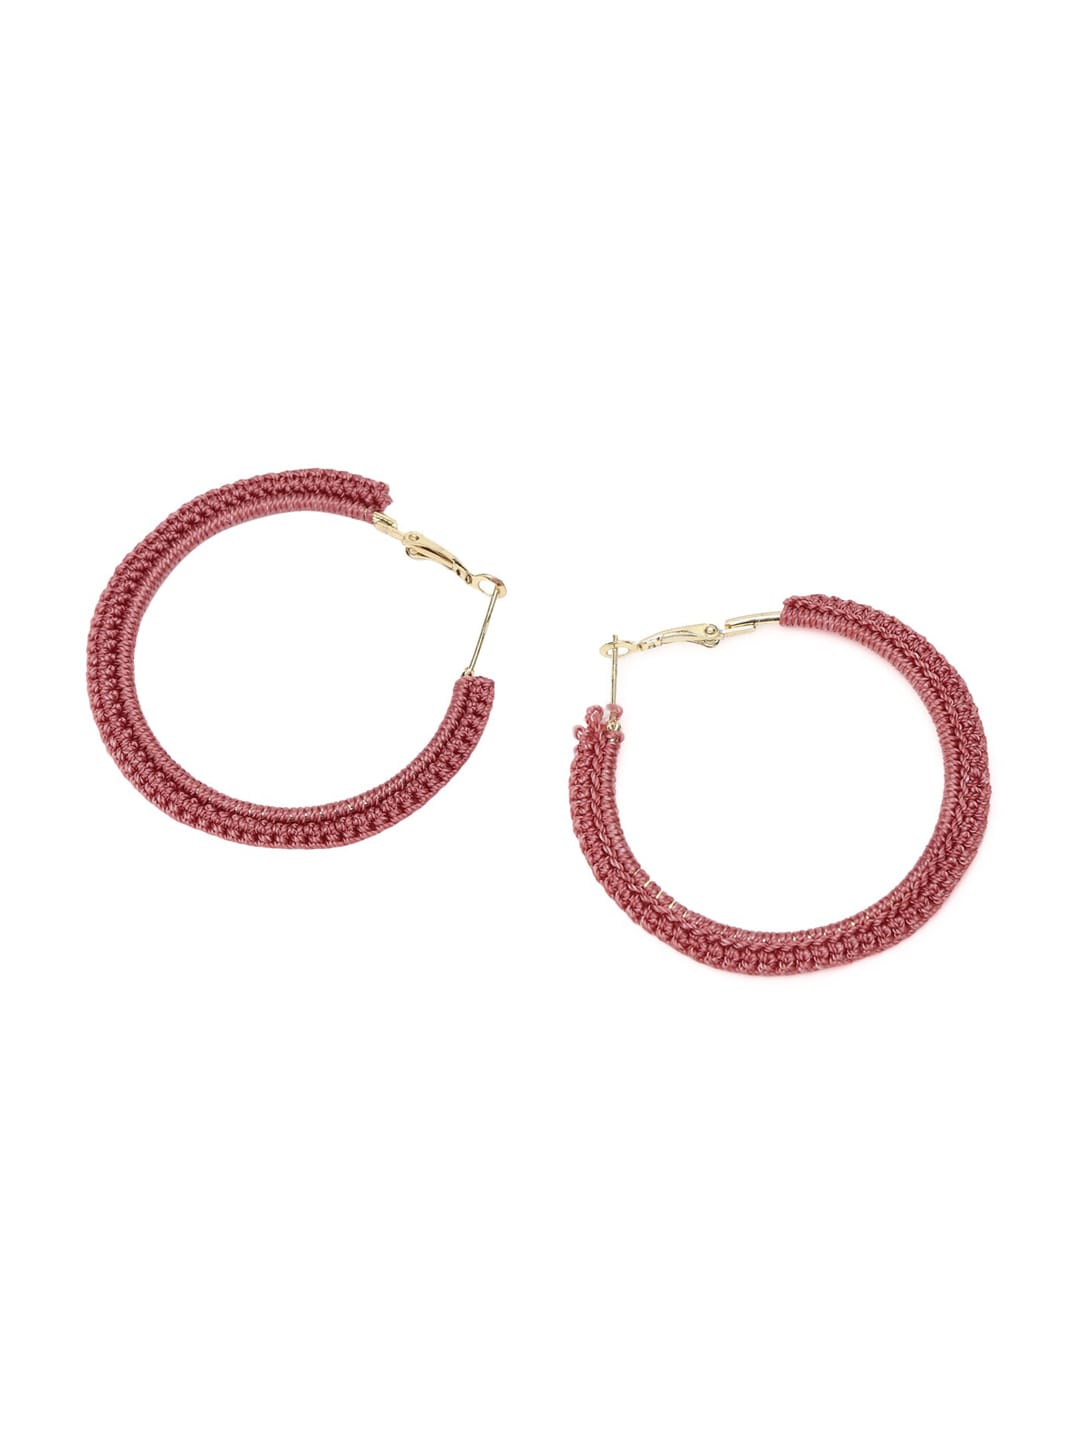 FOREVER 21 Pink Contemporary Hoop Earrings Price in India